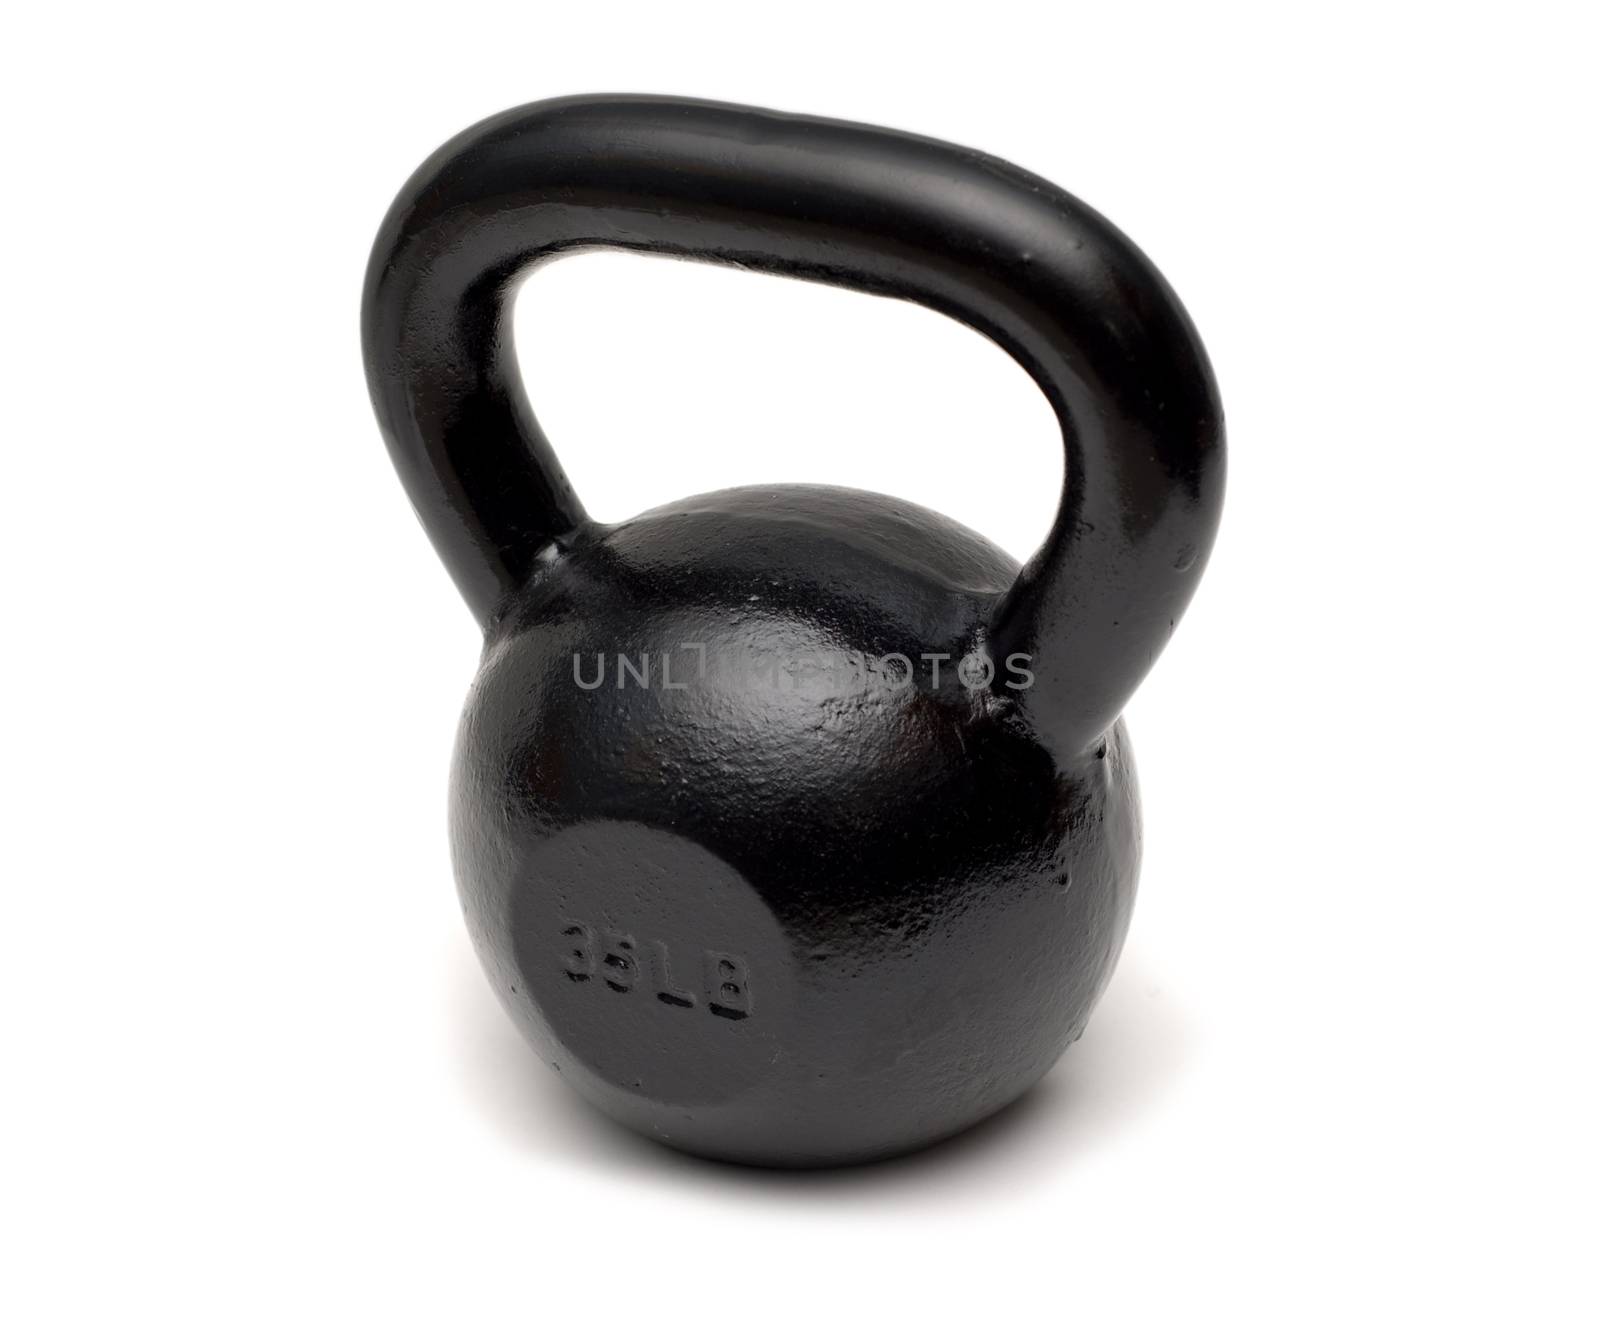 A 35-pound black cast iron kettlebell on a white background.